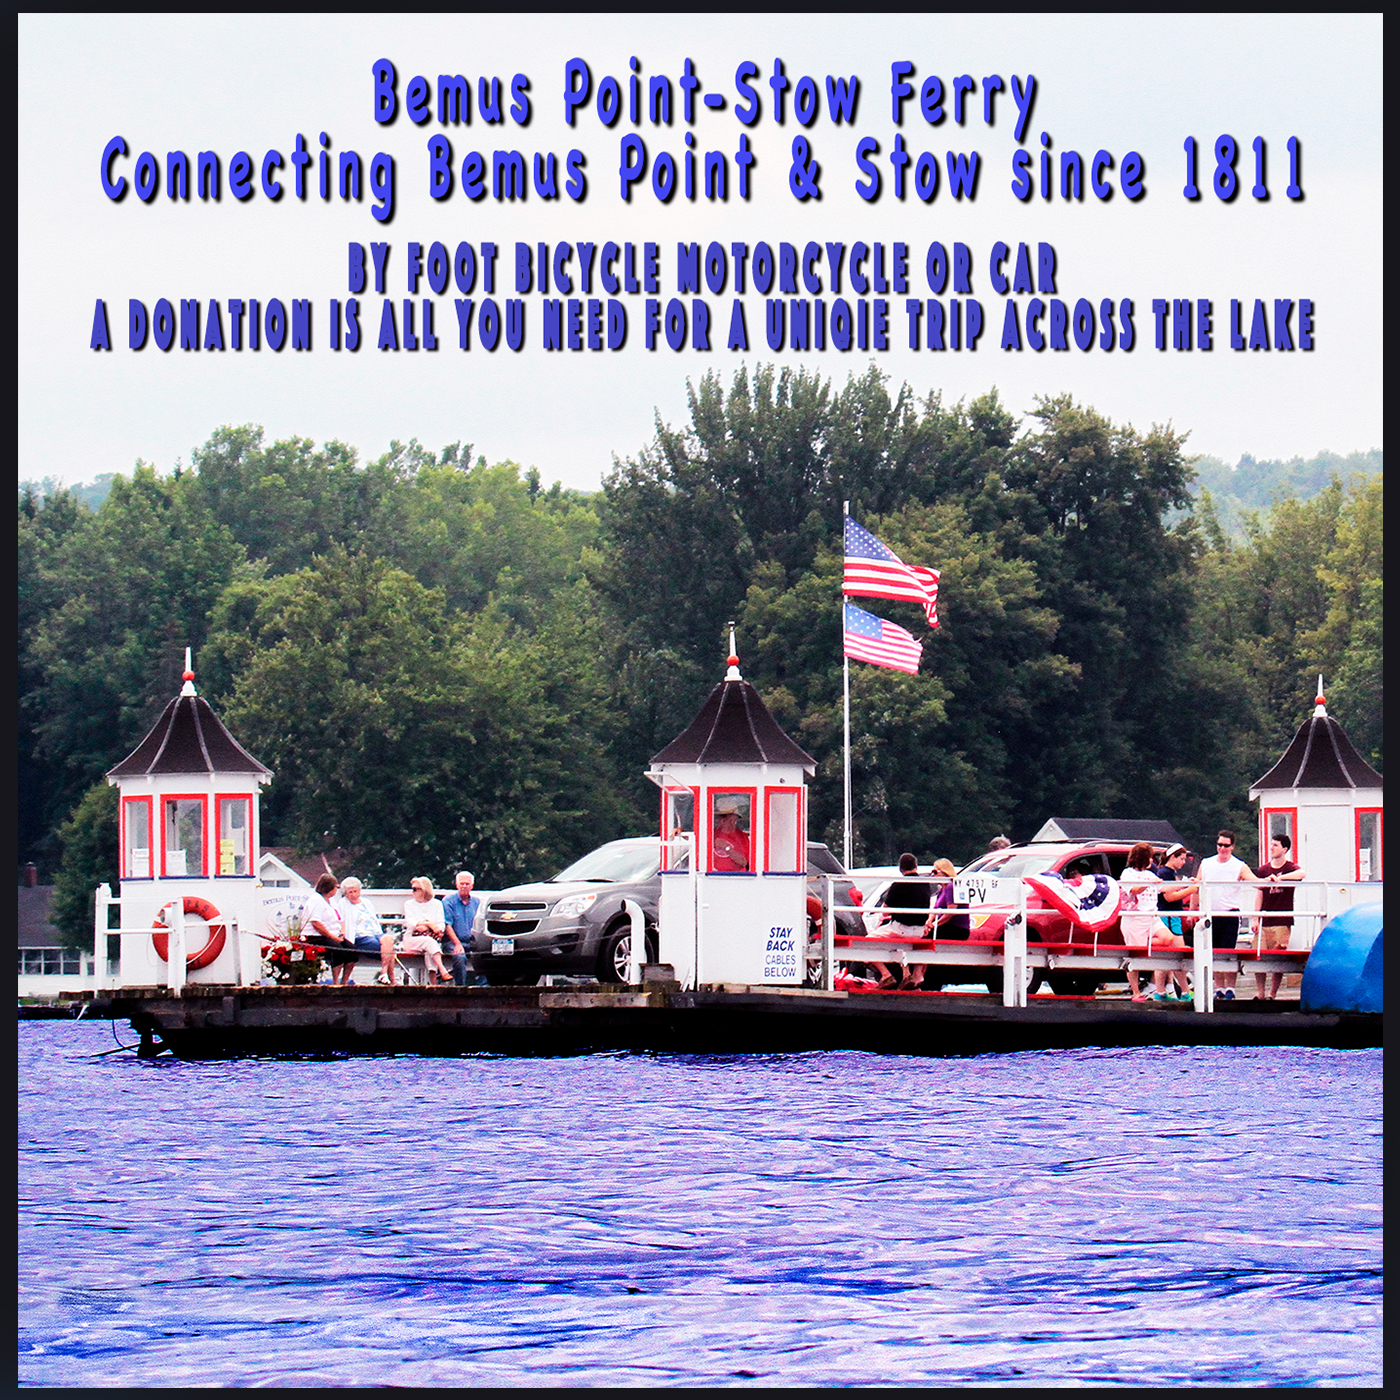 Bemus Point-Stow Ferry